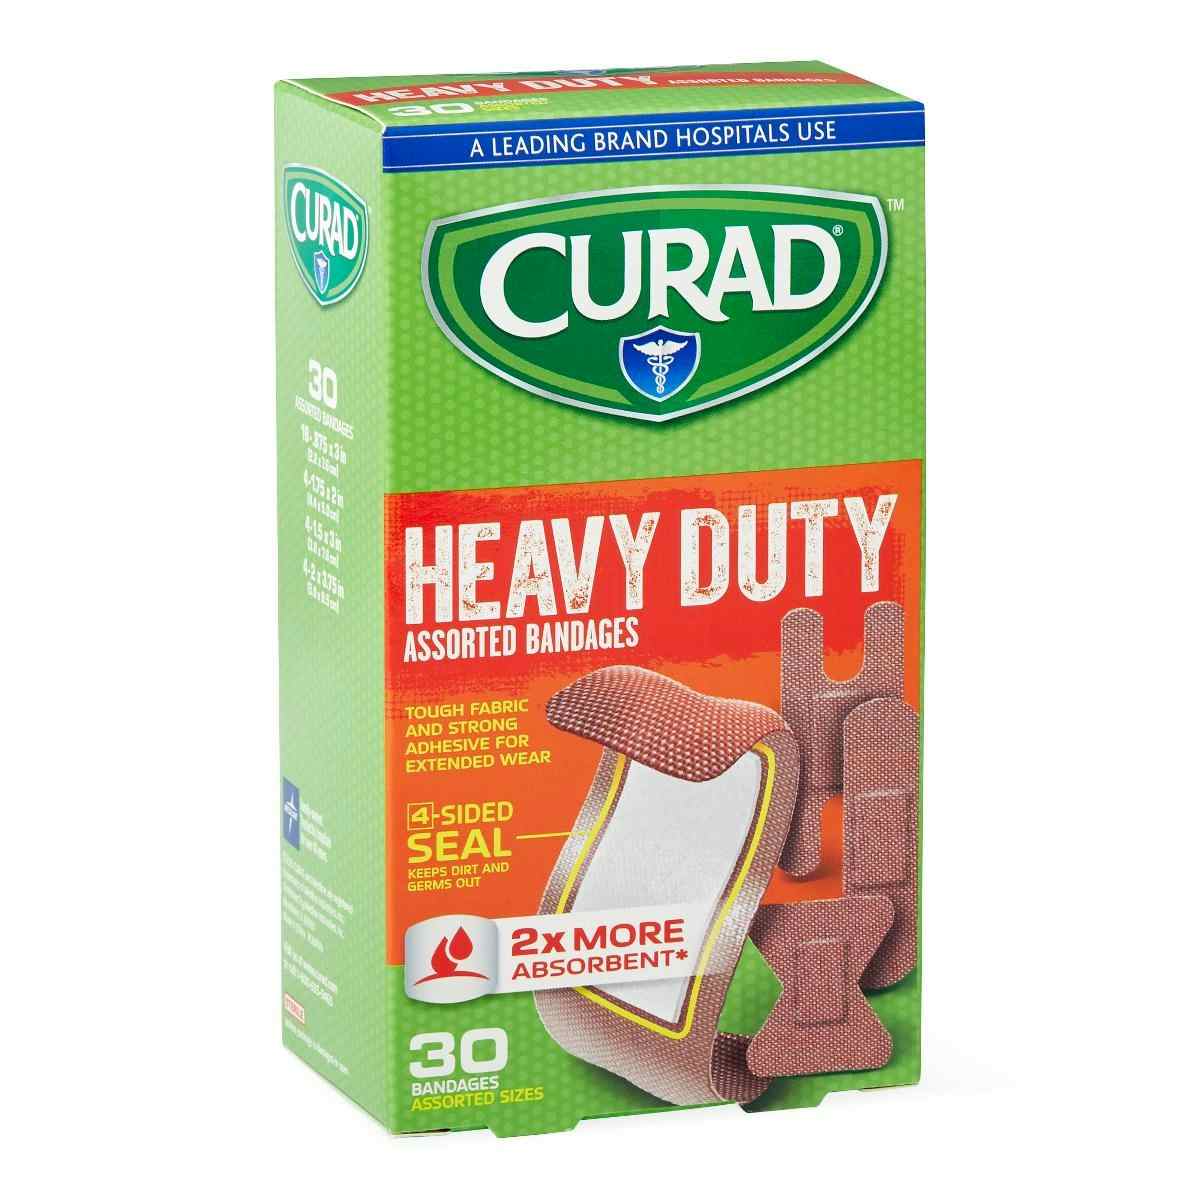 Curad Heavy Duty Bandages, CUR14924RB, Assorted Sizes - Case of 24